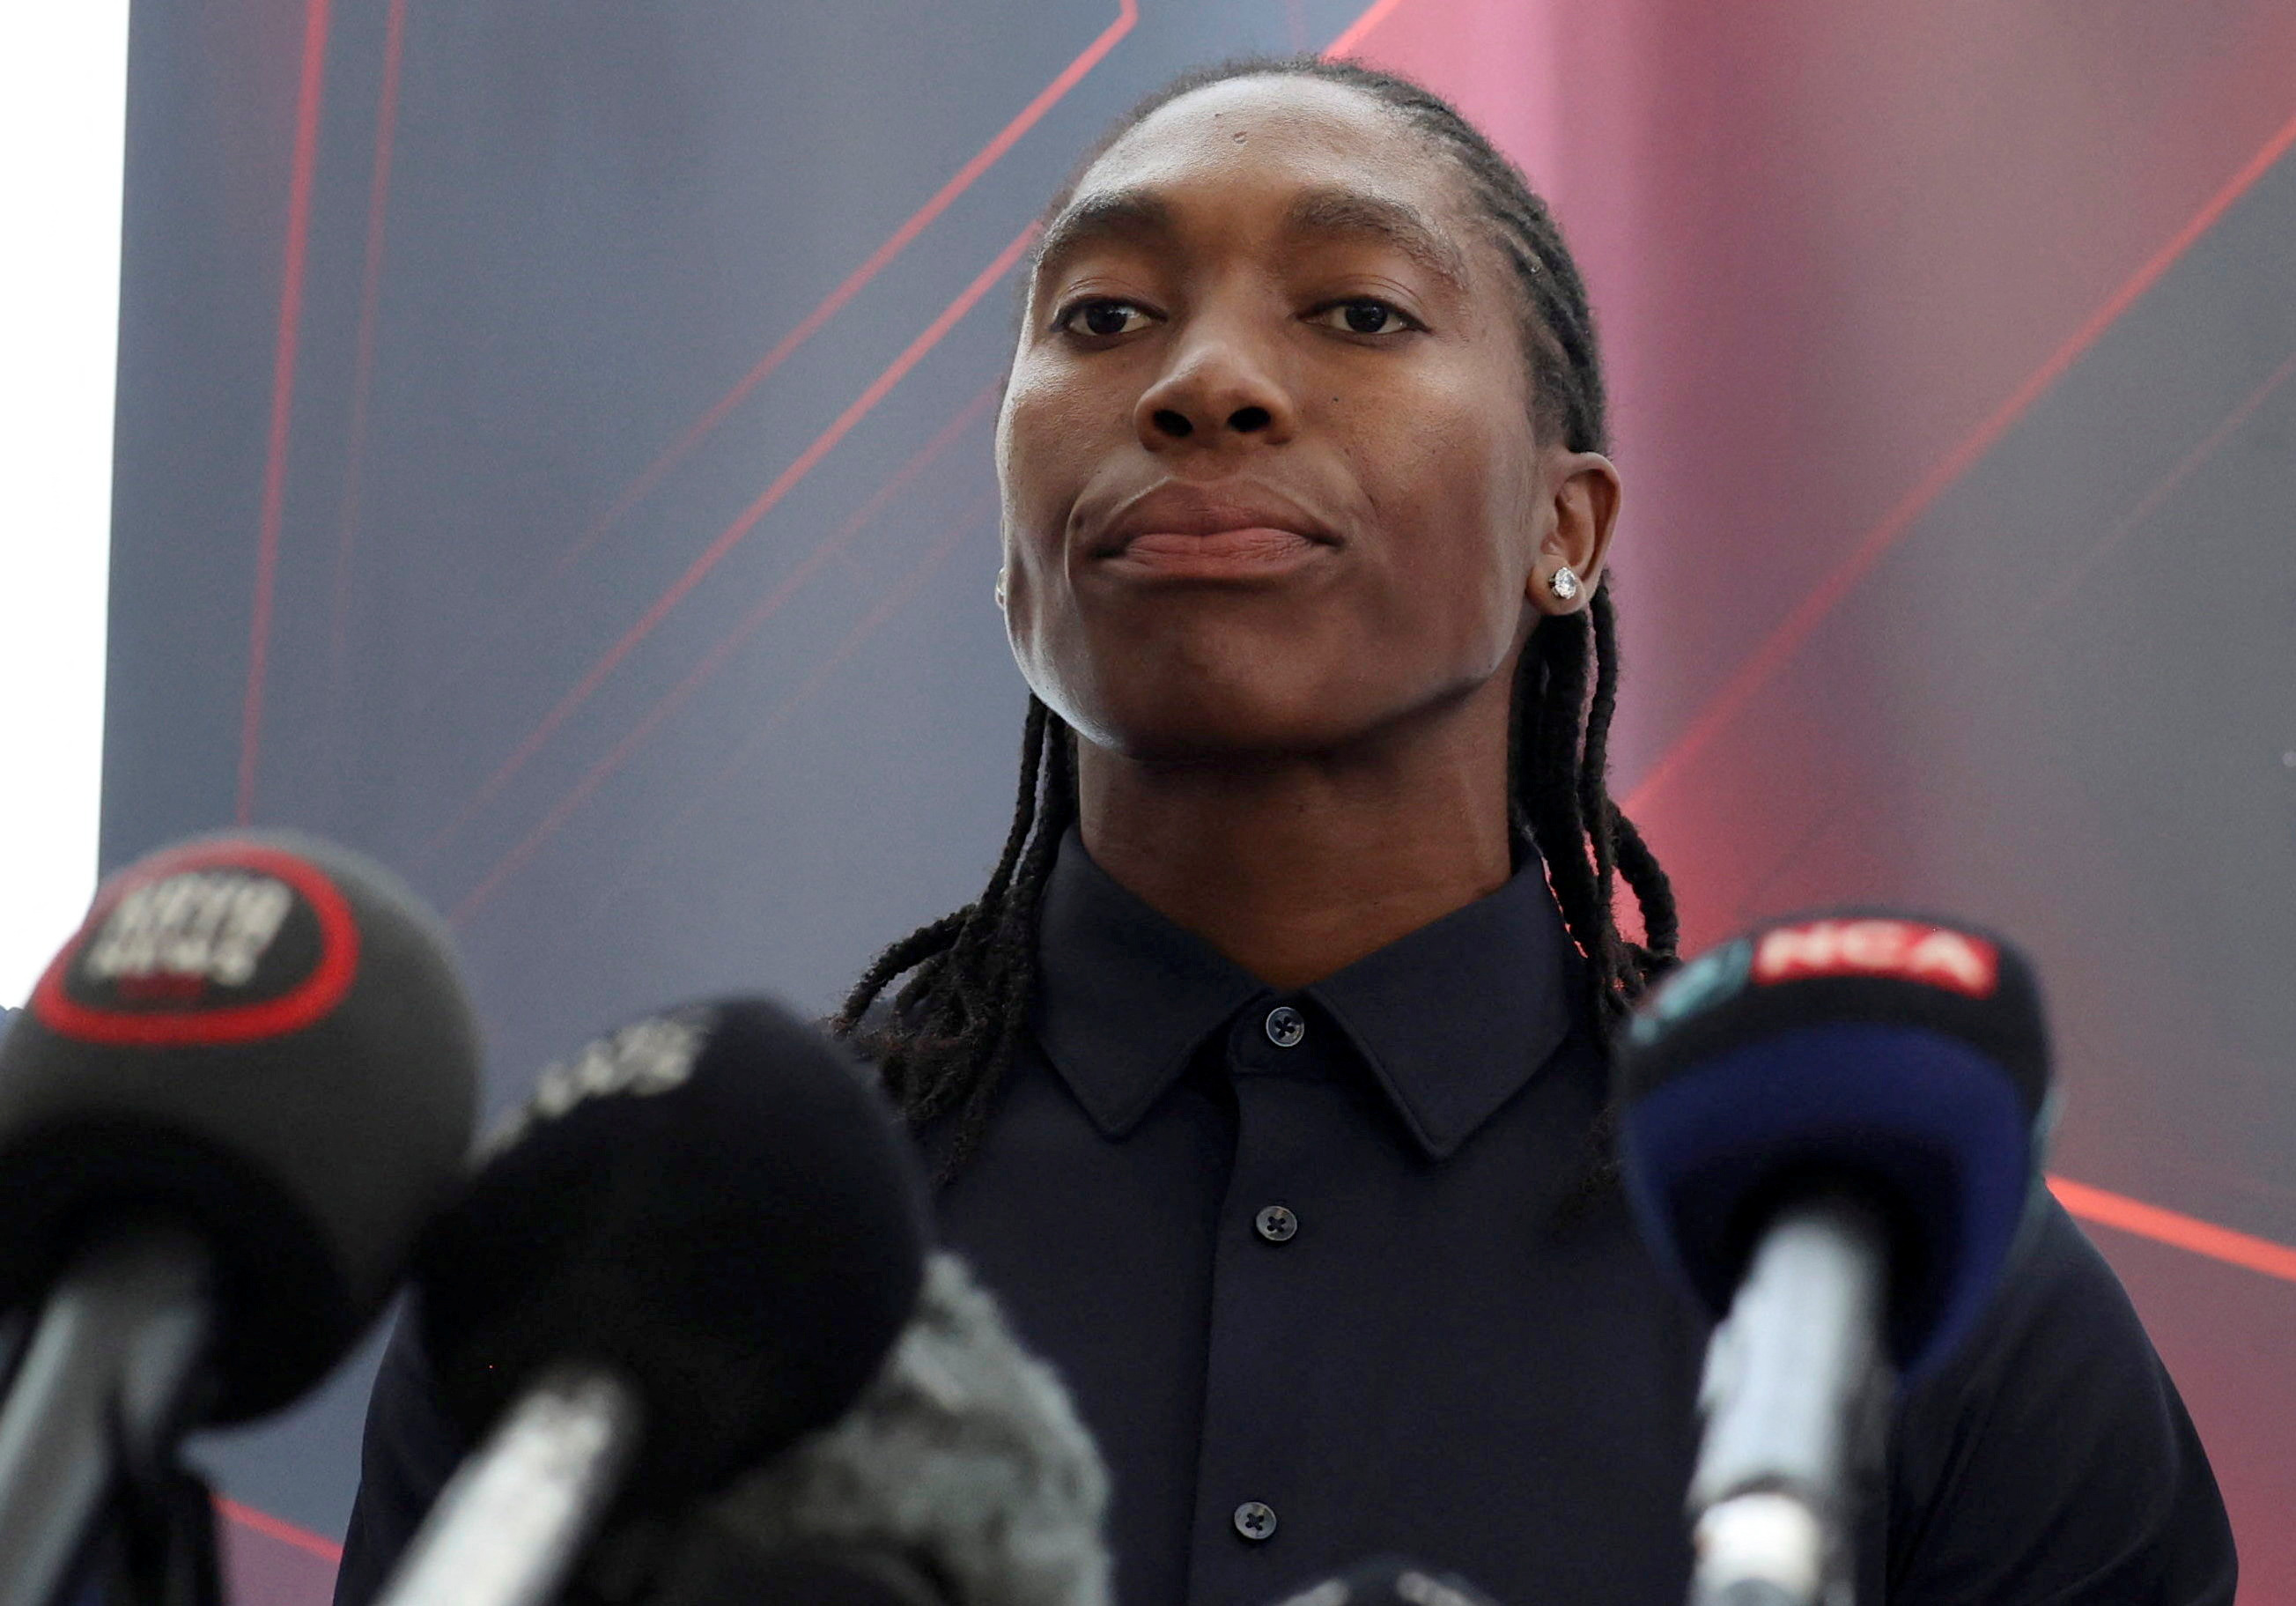 South African athlete, Caster Semenya reacts during her press conference about the upcoming case at the Grand Chamber of the European Court of Human Rights, in Johannesburg